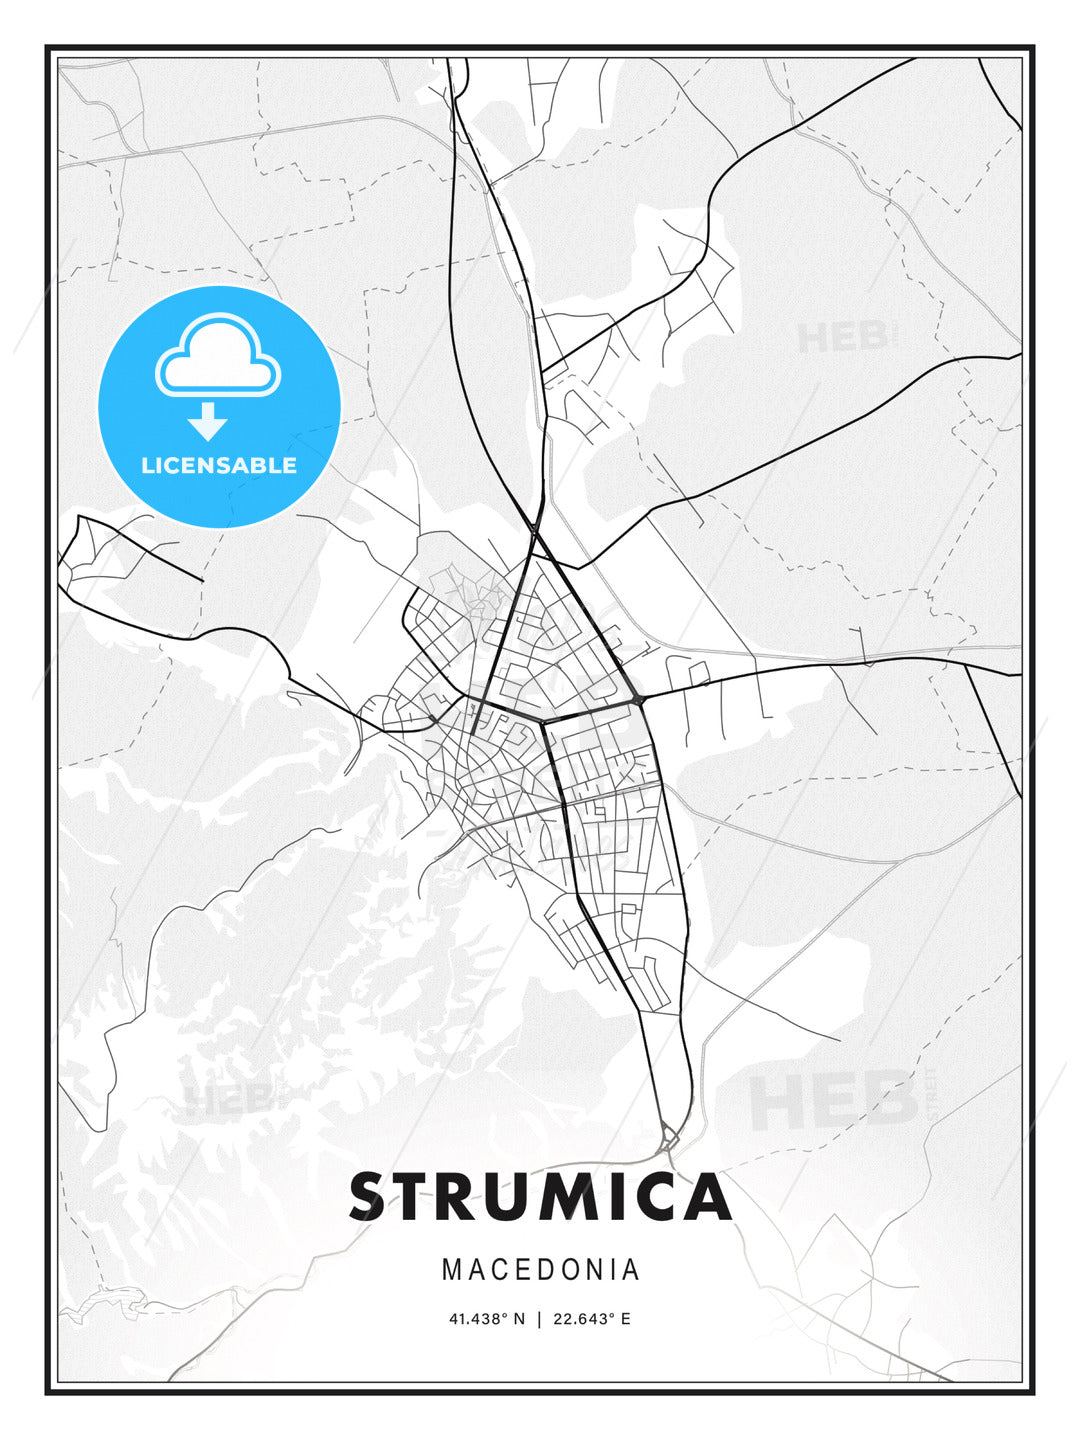 Strumica, Macedonia, Modern Print Template in Various Formats - HEBSTREITS Sketches